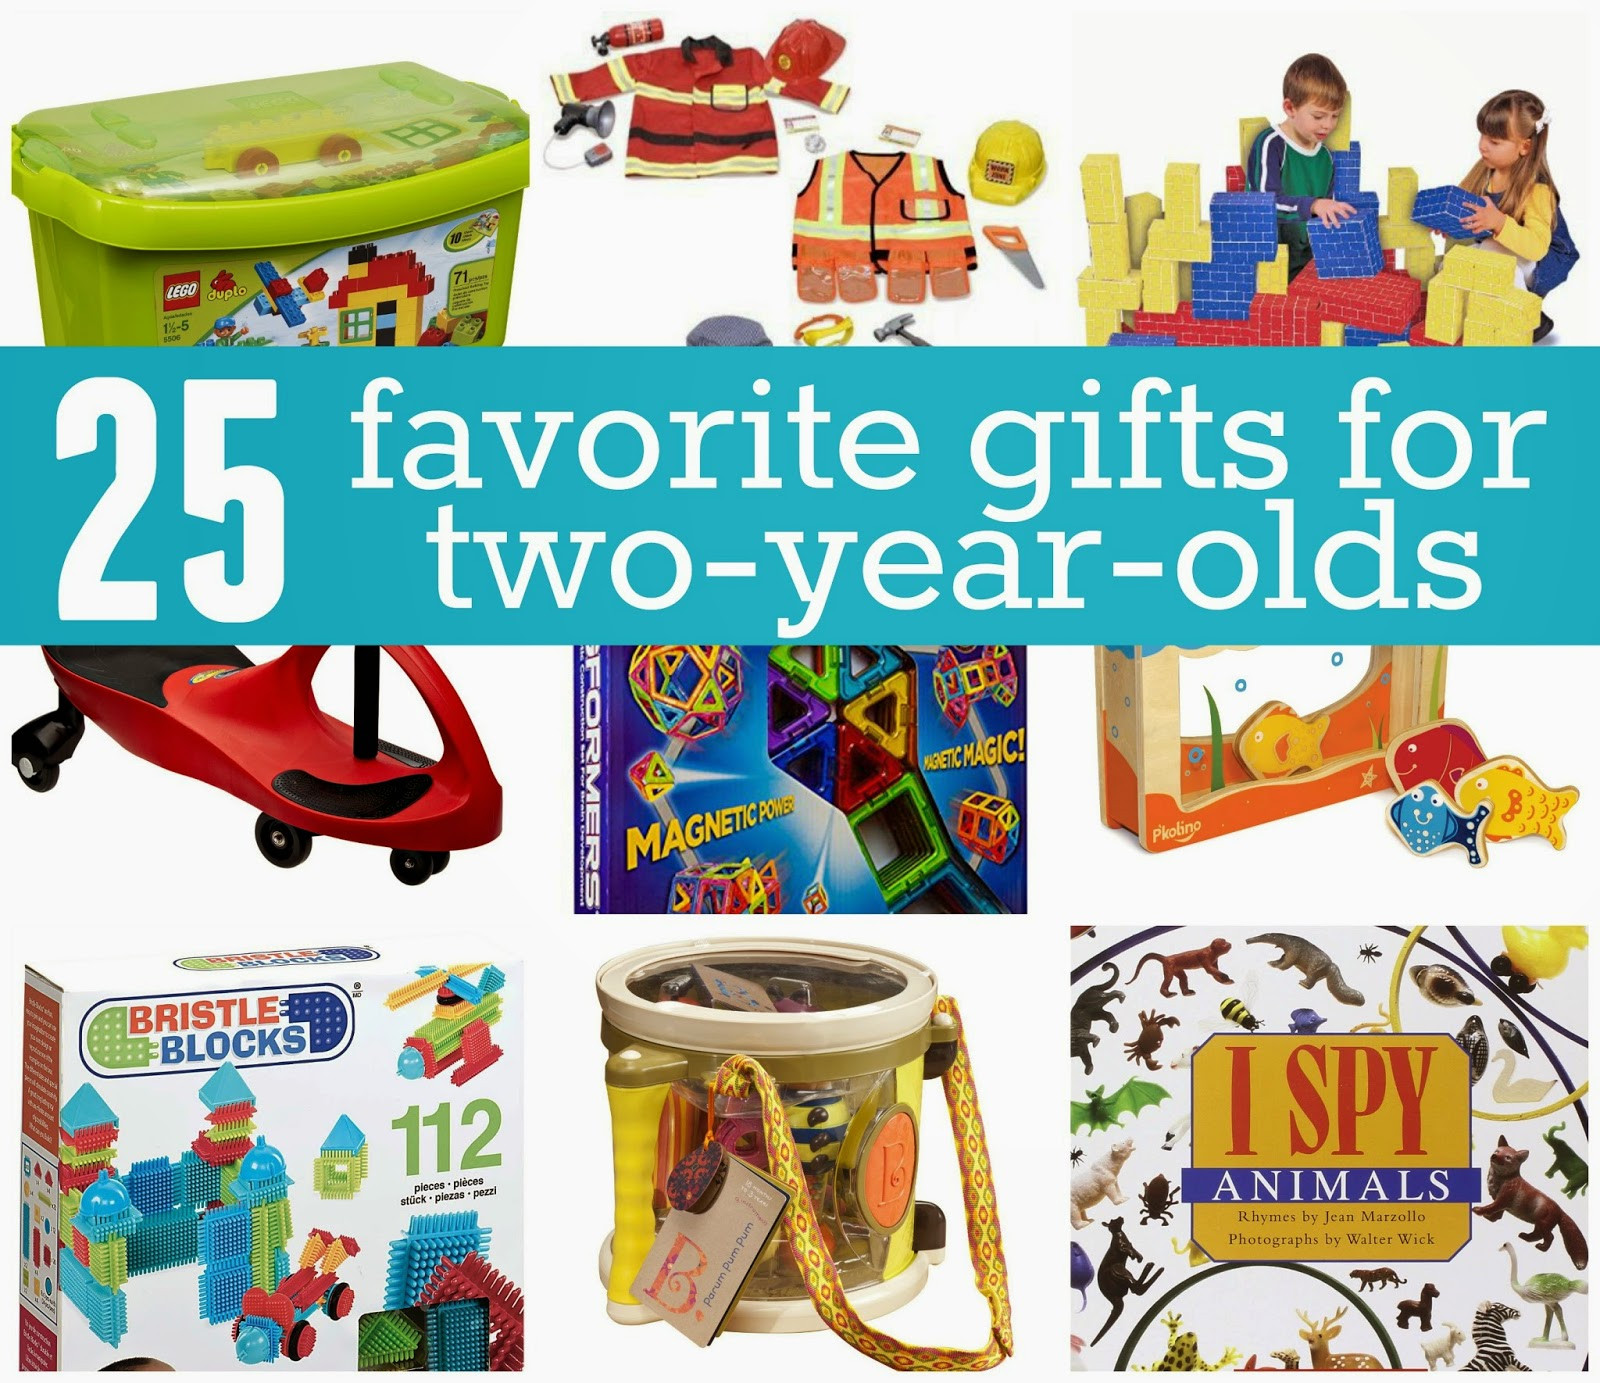 Valentine Gift Ideas For 2 Year Old Boy
 Toddler Approved Favorite Gifts for 2 Year Olds